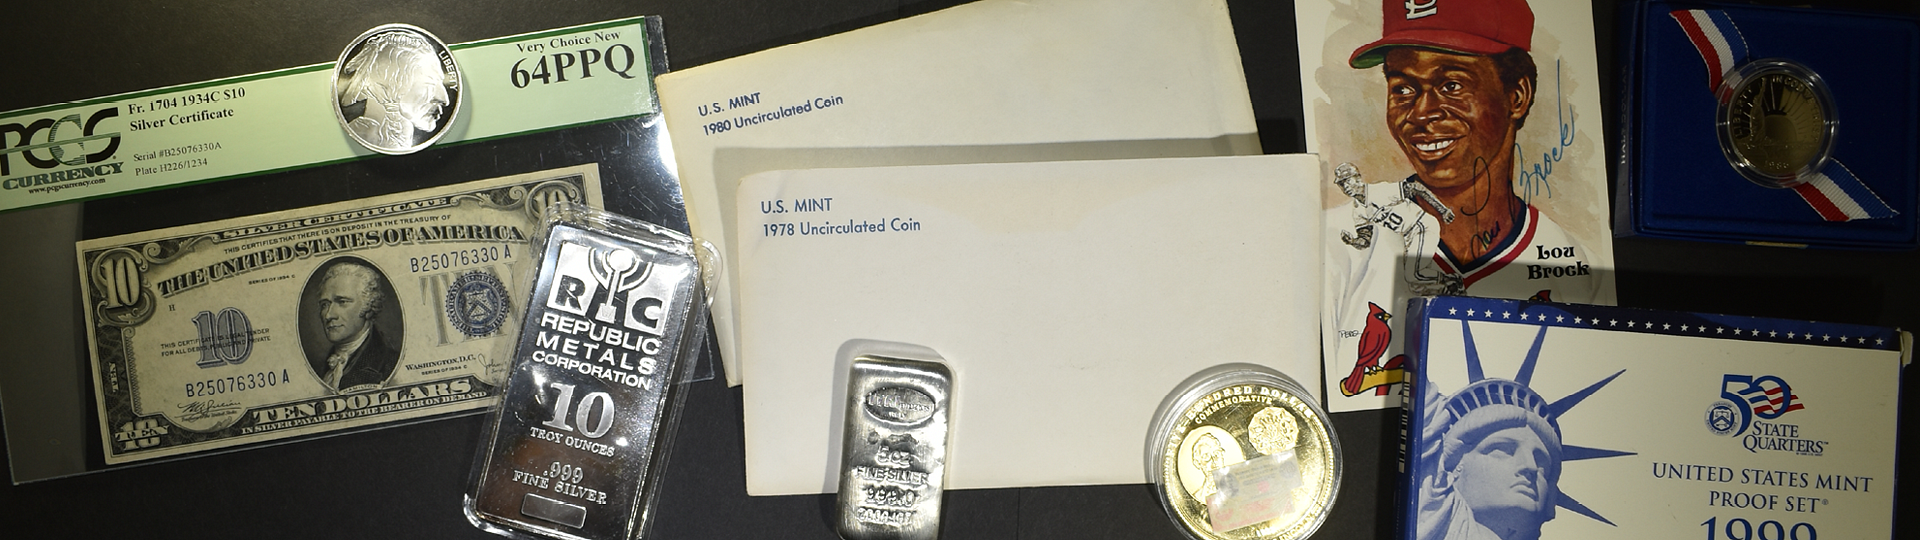 March 12th Silver City Rare Coins & Currency by Silver City Auctions